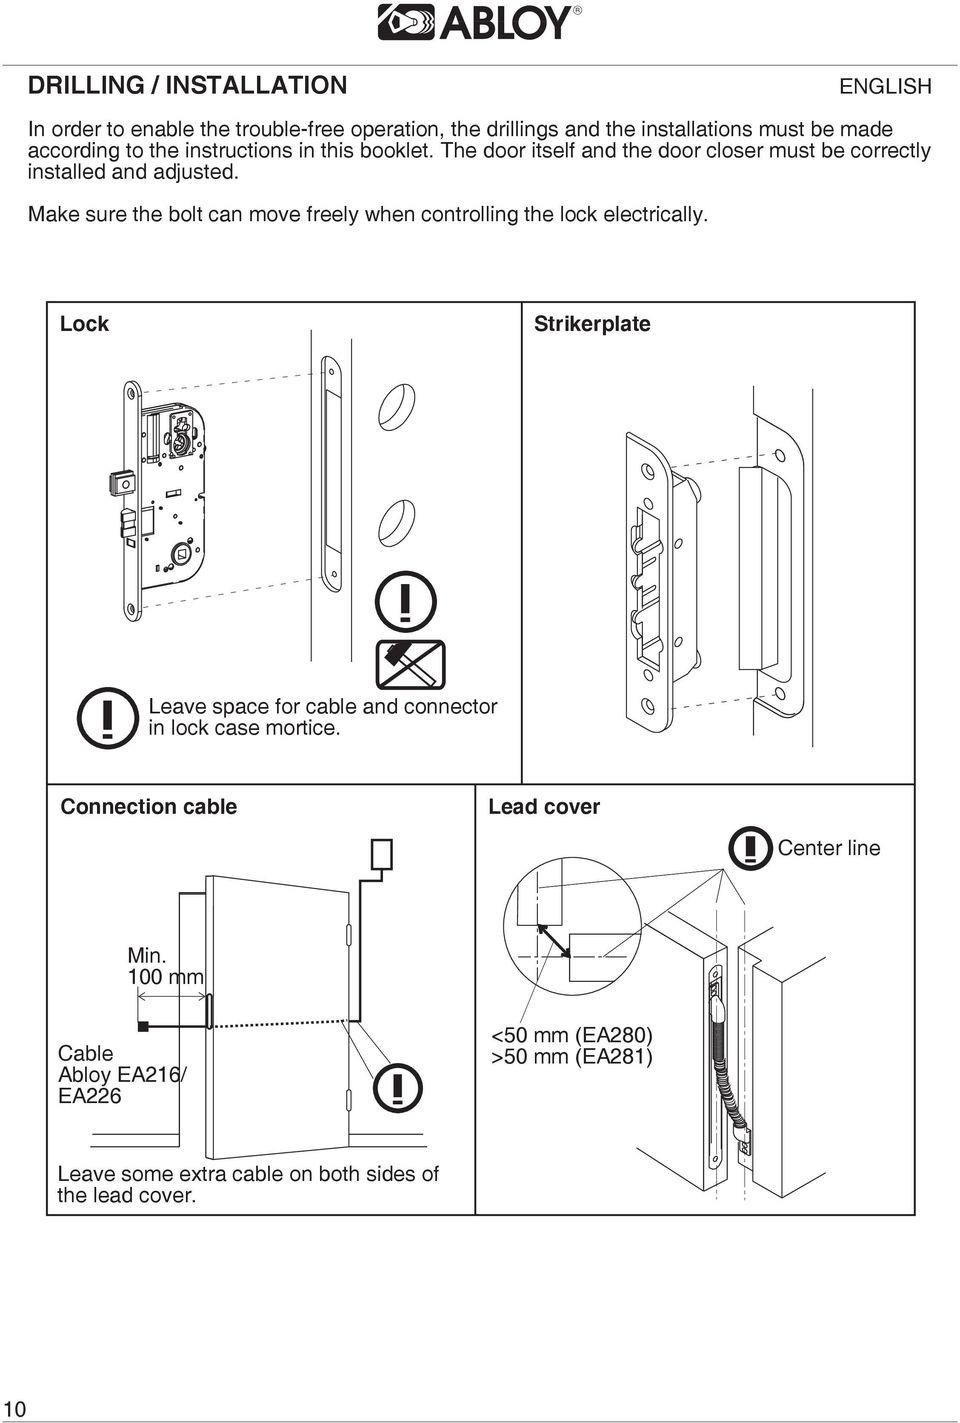 Make sure the bolt can move freely when controlling the lock electrically.